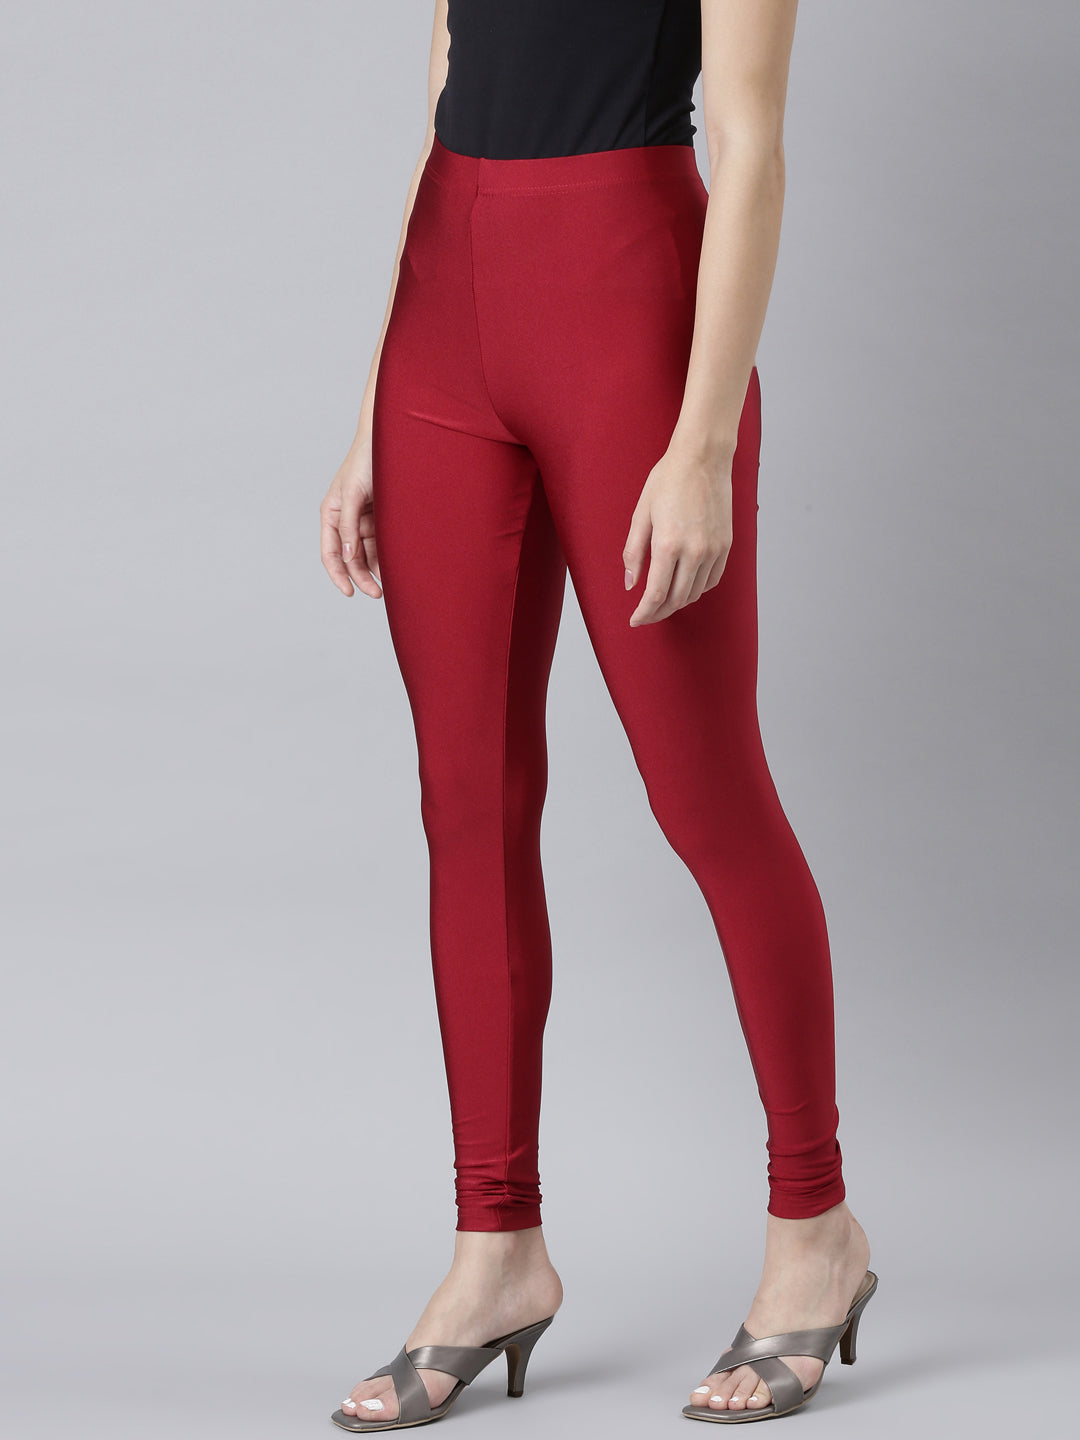 Many Colors Are Available Churidar Ladies Designer Leggings, Size